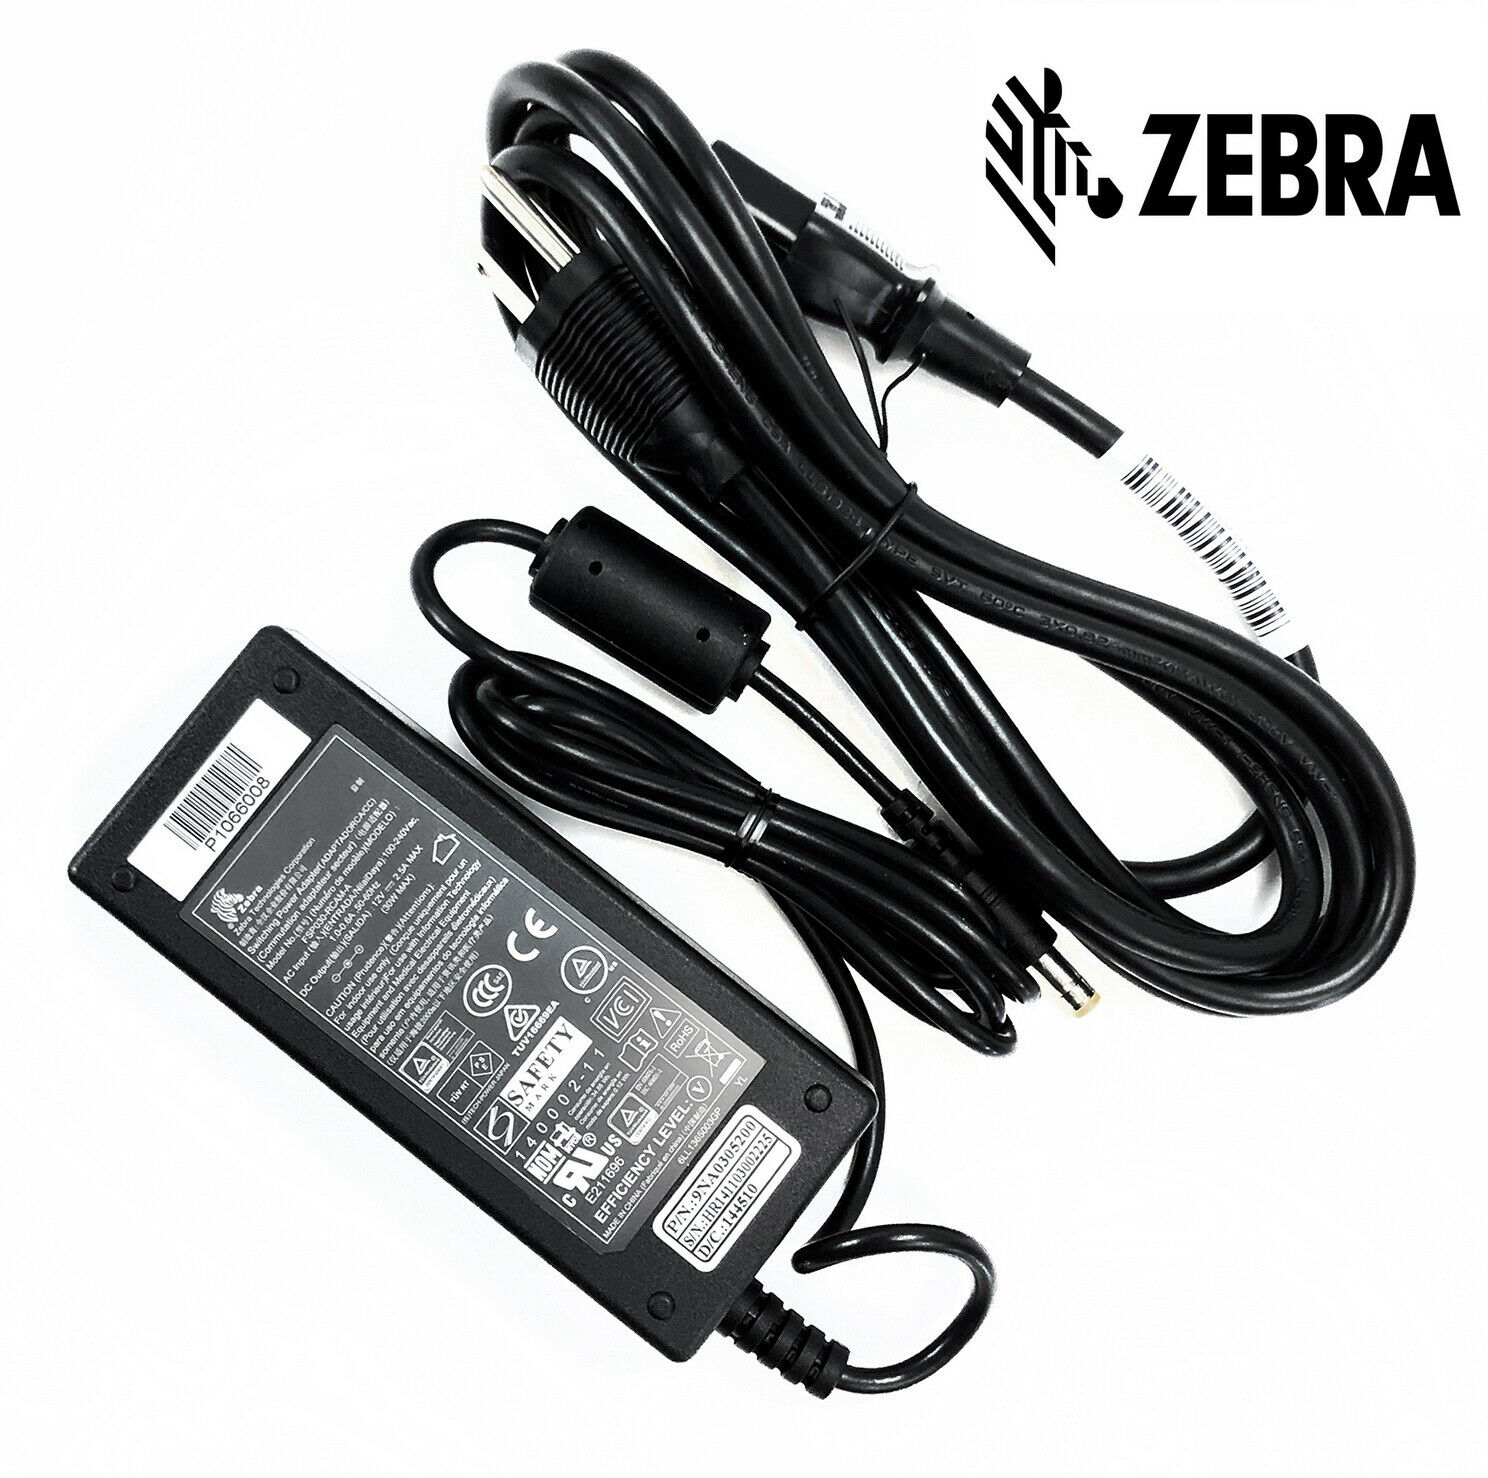 NEW OEM Zebra Healthcare AC Adapter Charger for ZQ510 ZQ520 Printers W/P.Cord Country/Region of Man